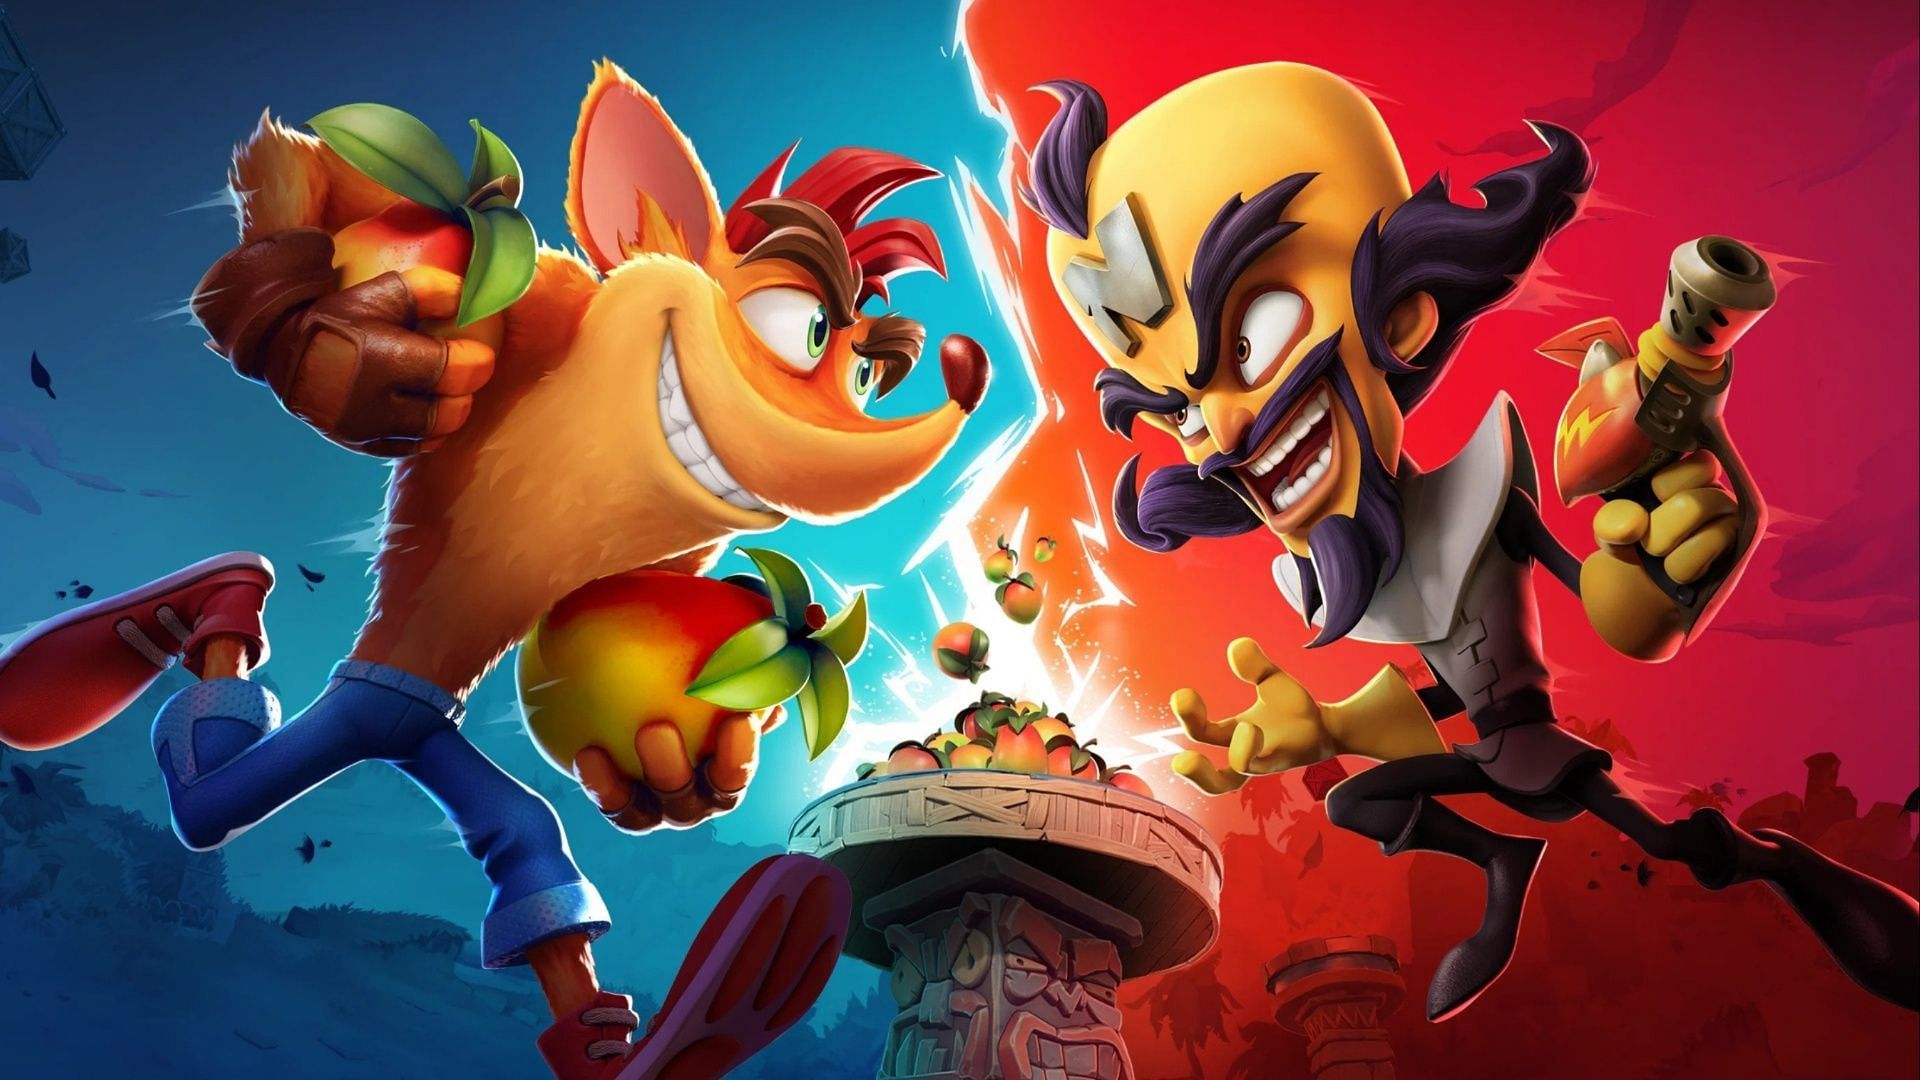 Crash Team Racing Nitro-Fueled Developers Have No Plans For Cross-Play